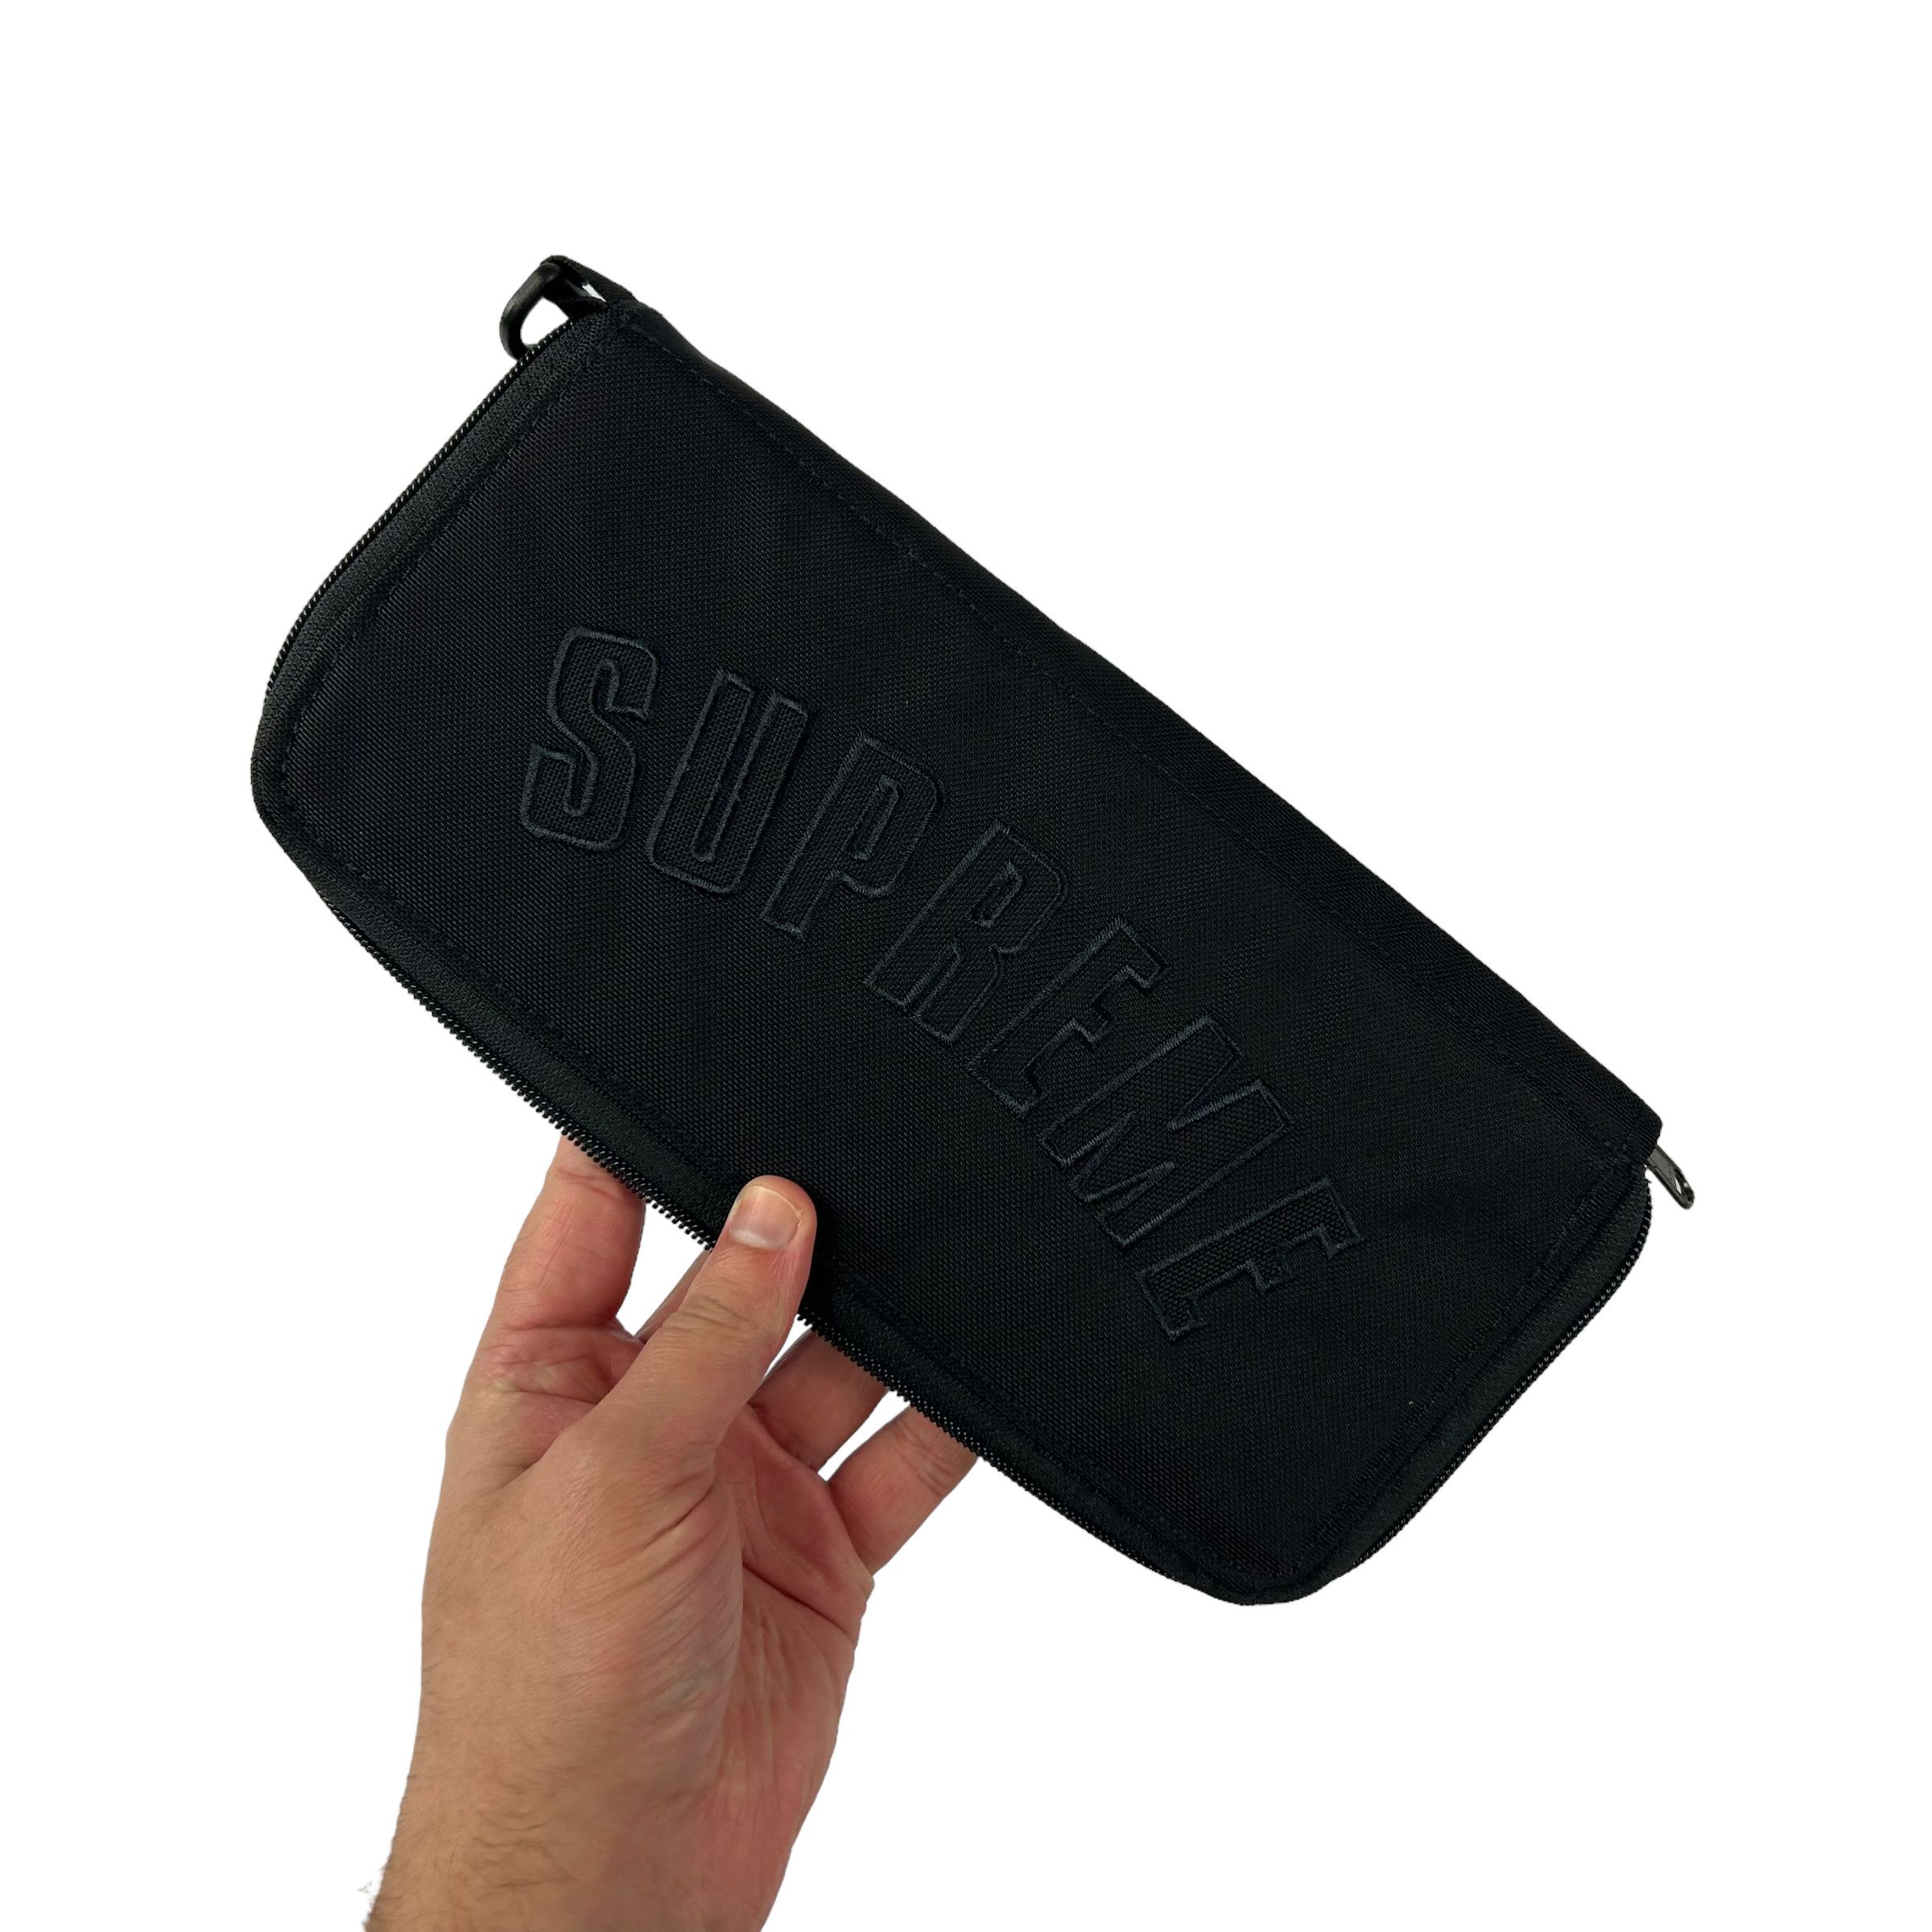 Supreme SS19 supreme x north face large wallet / organizer | Grailed